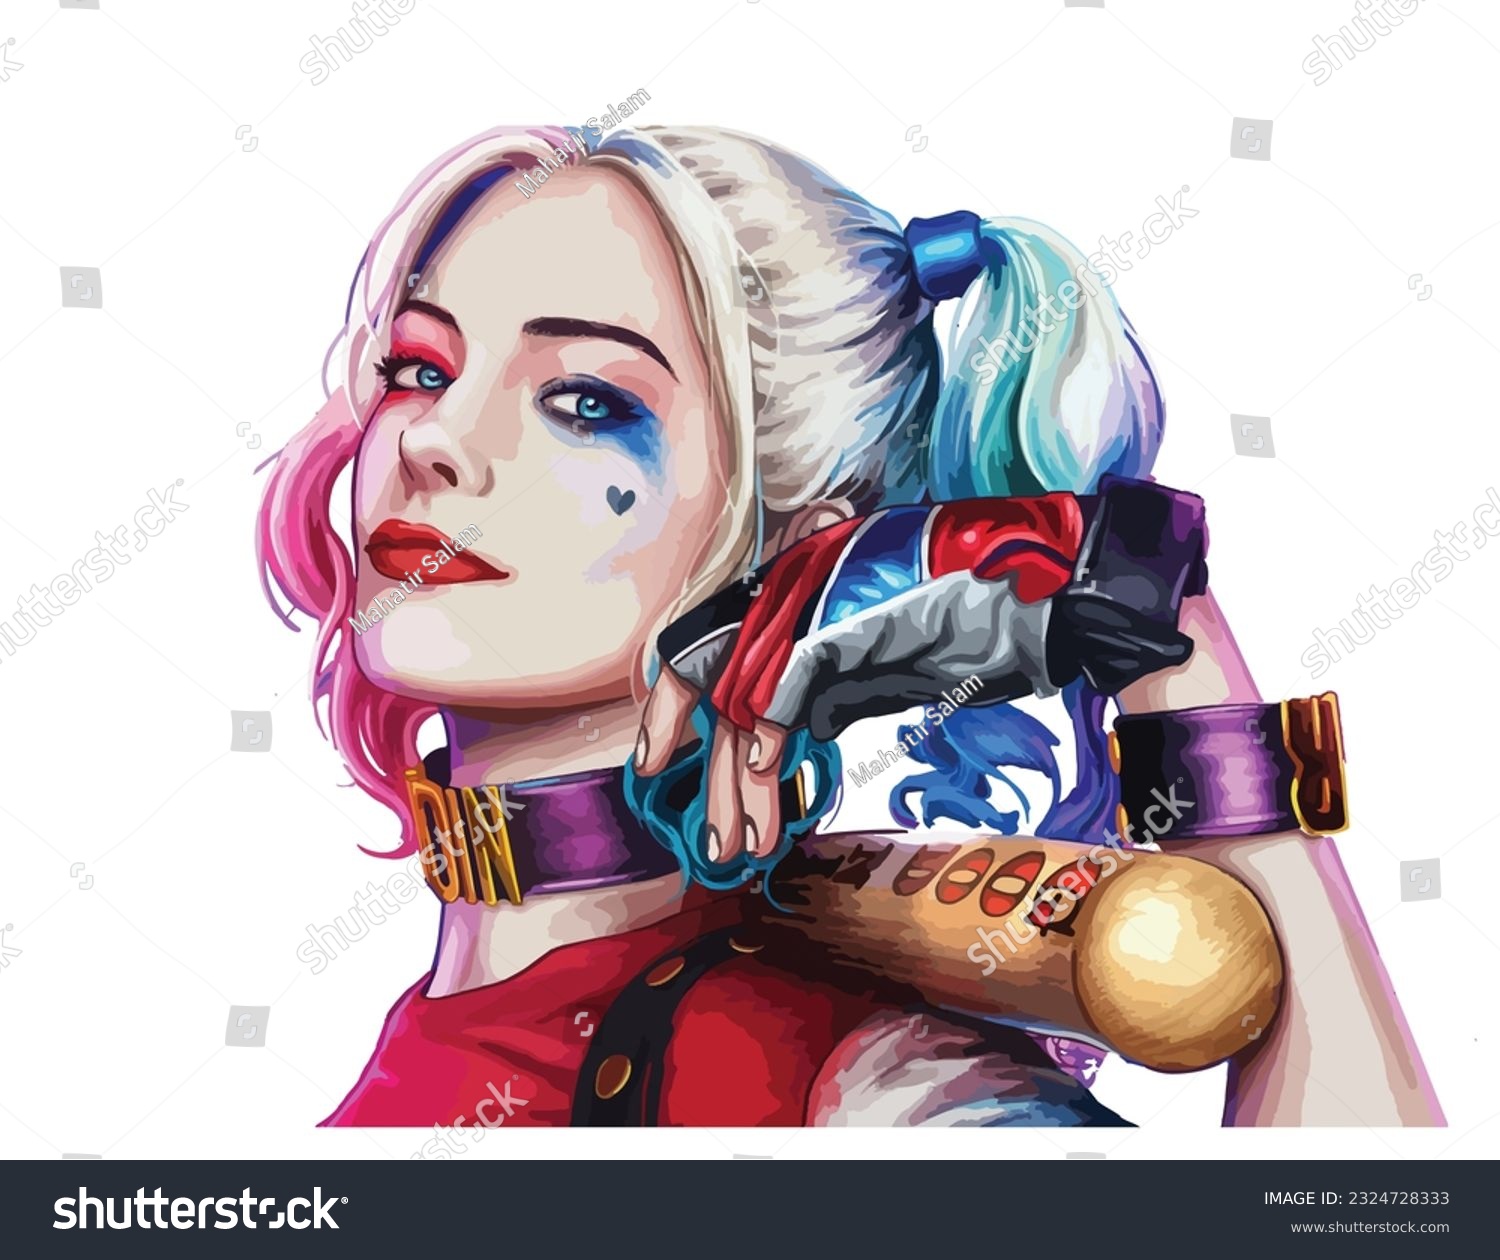 Google Show Me A Picture Of Harley Quinn sharing wife